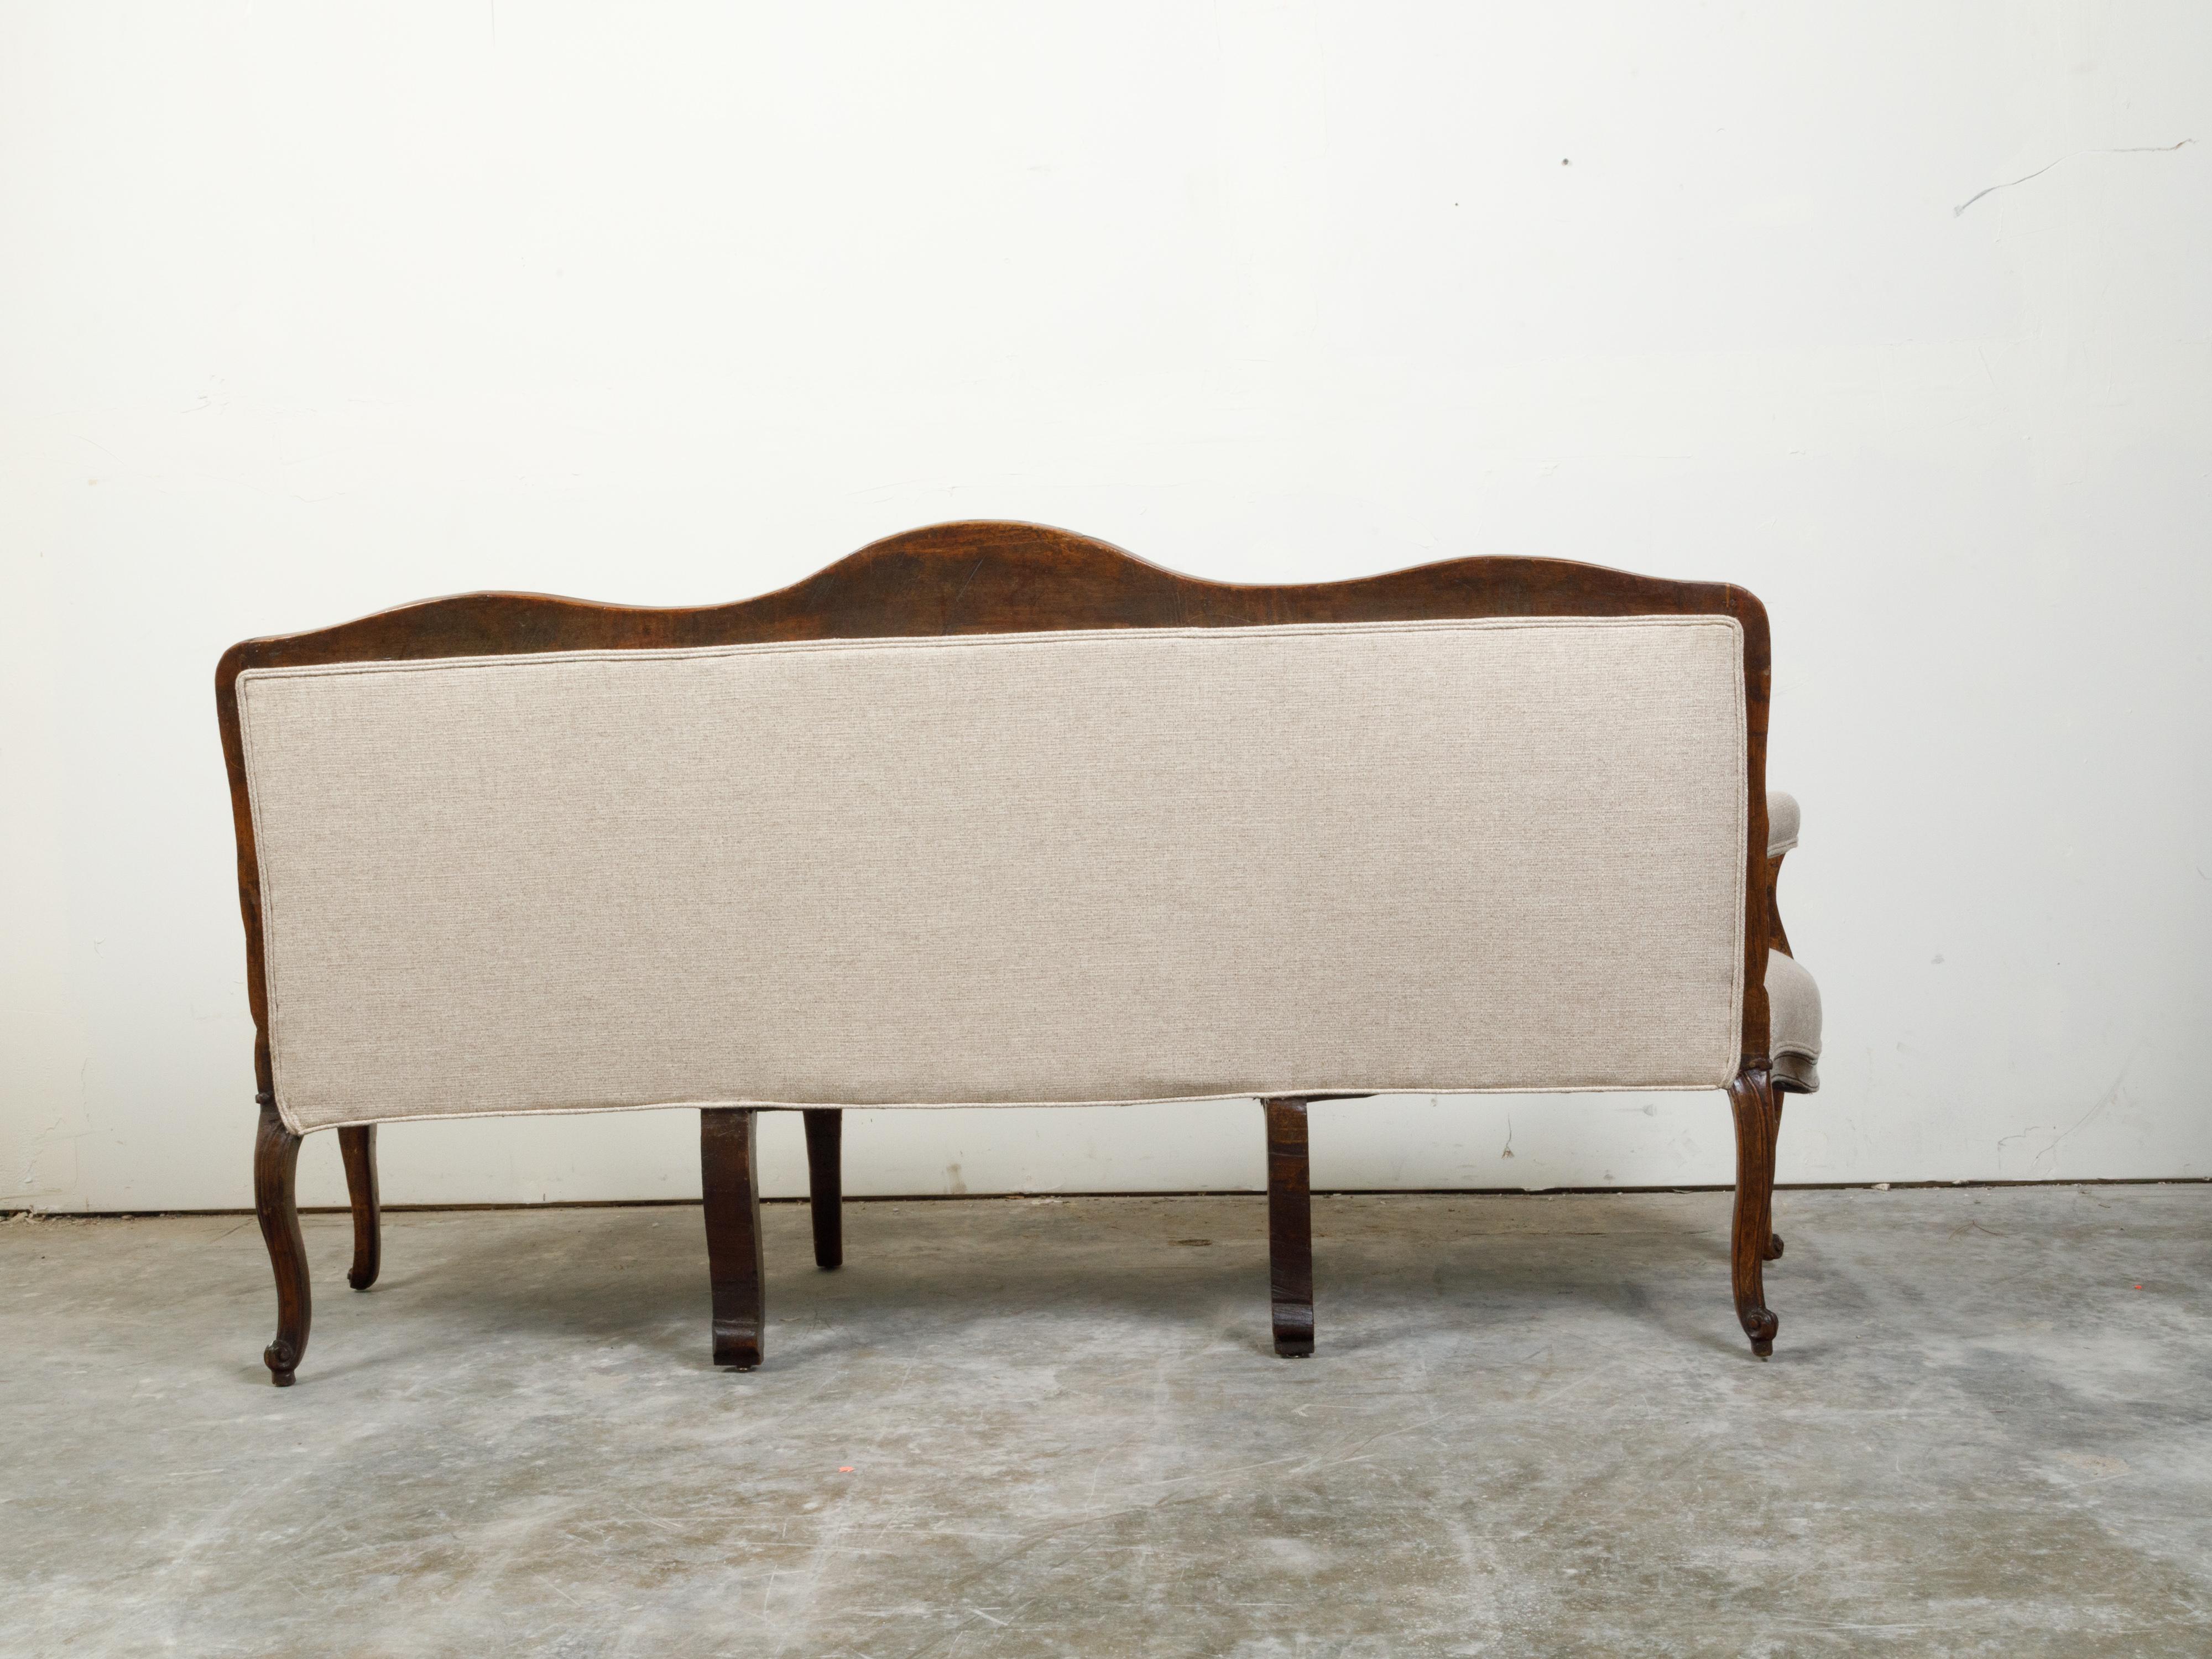 18th Century and Earlier Italian 18th Century Rococo Walnut Sofa with Cabriole Legs and New Upholstery